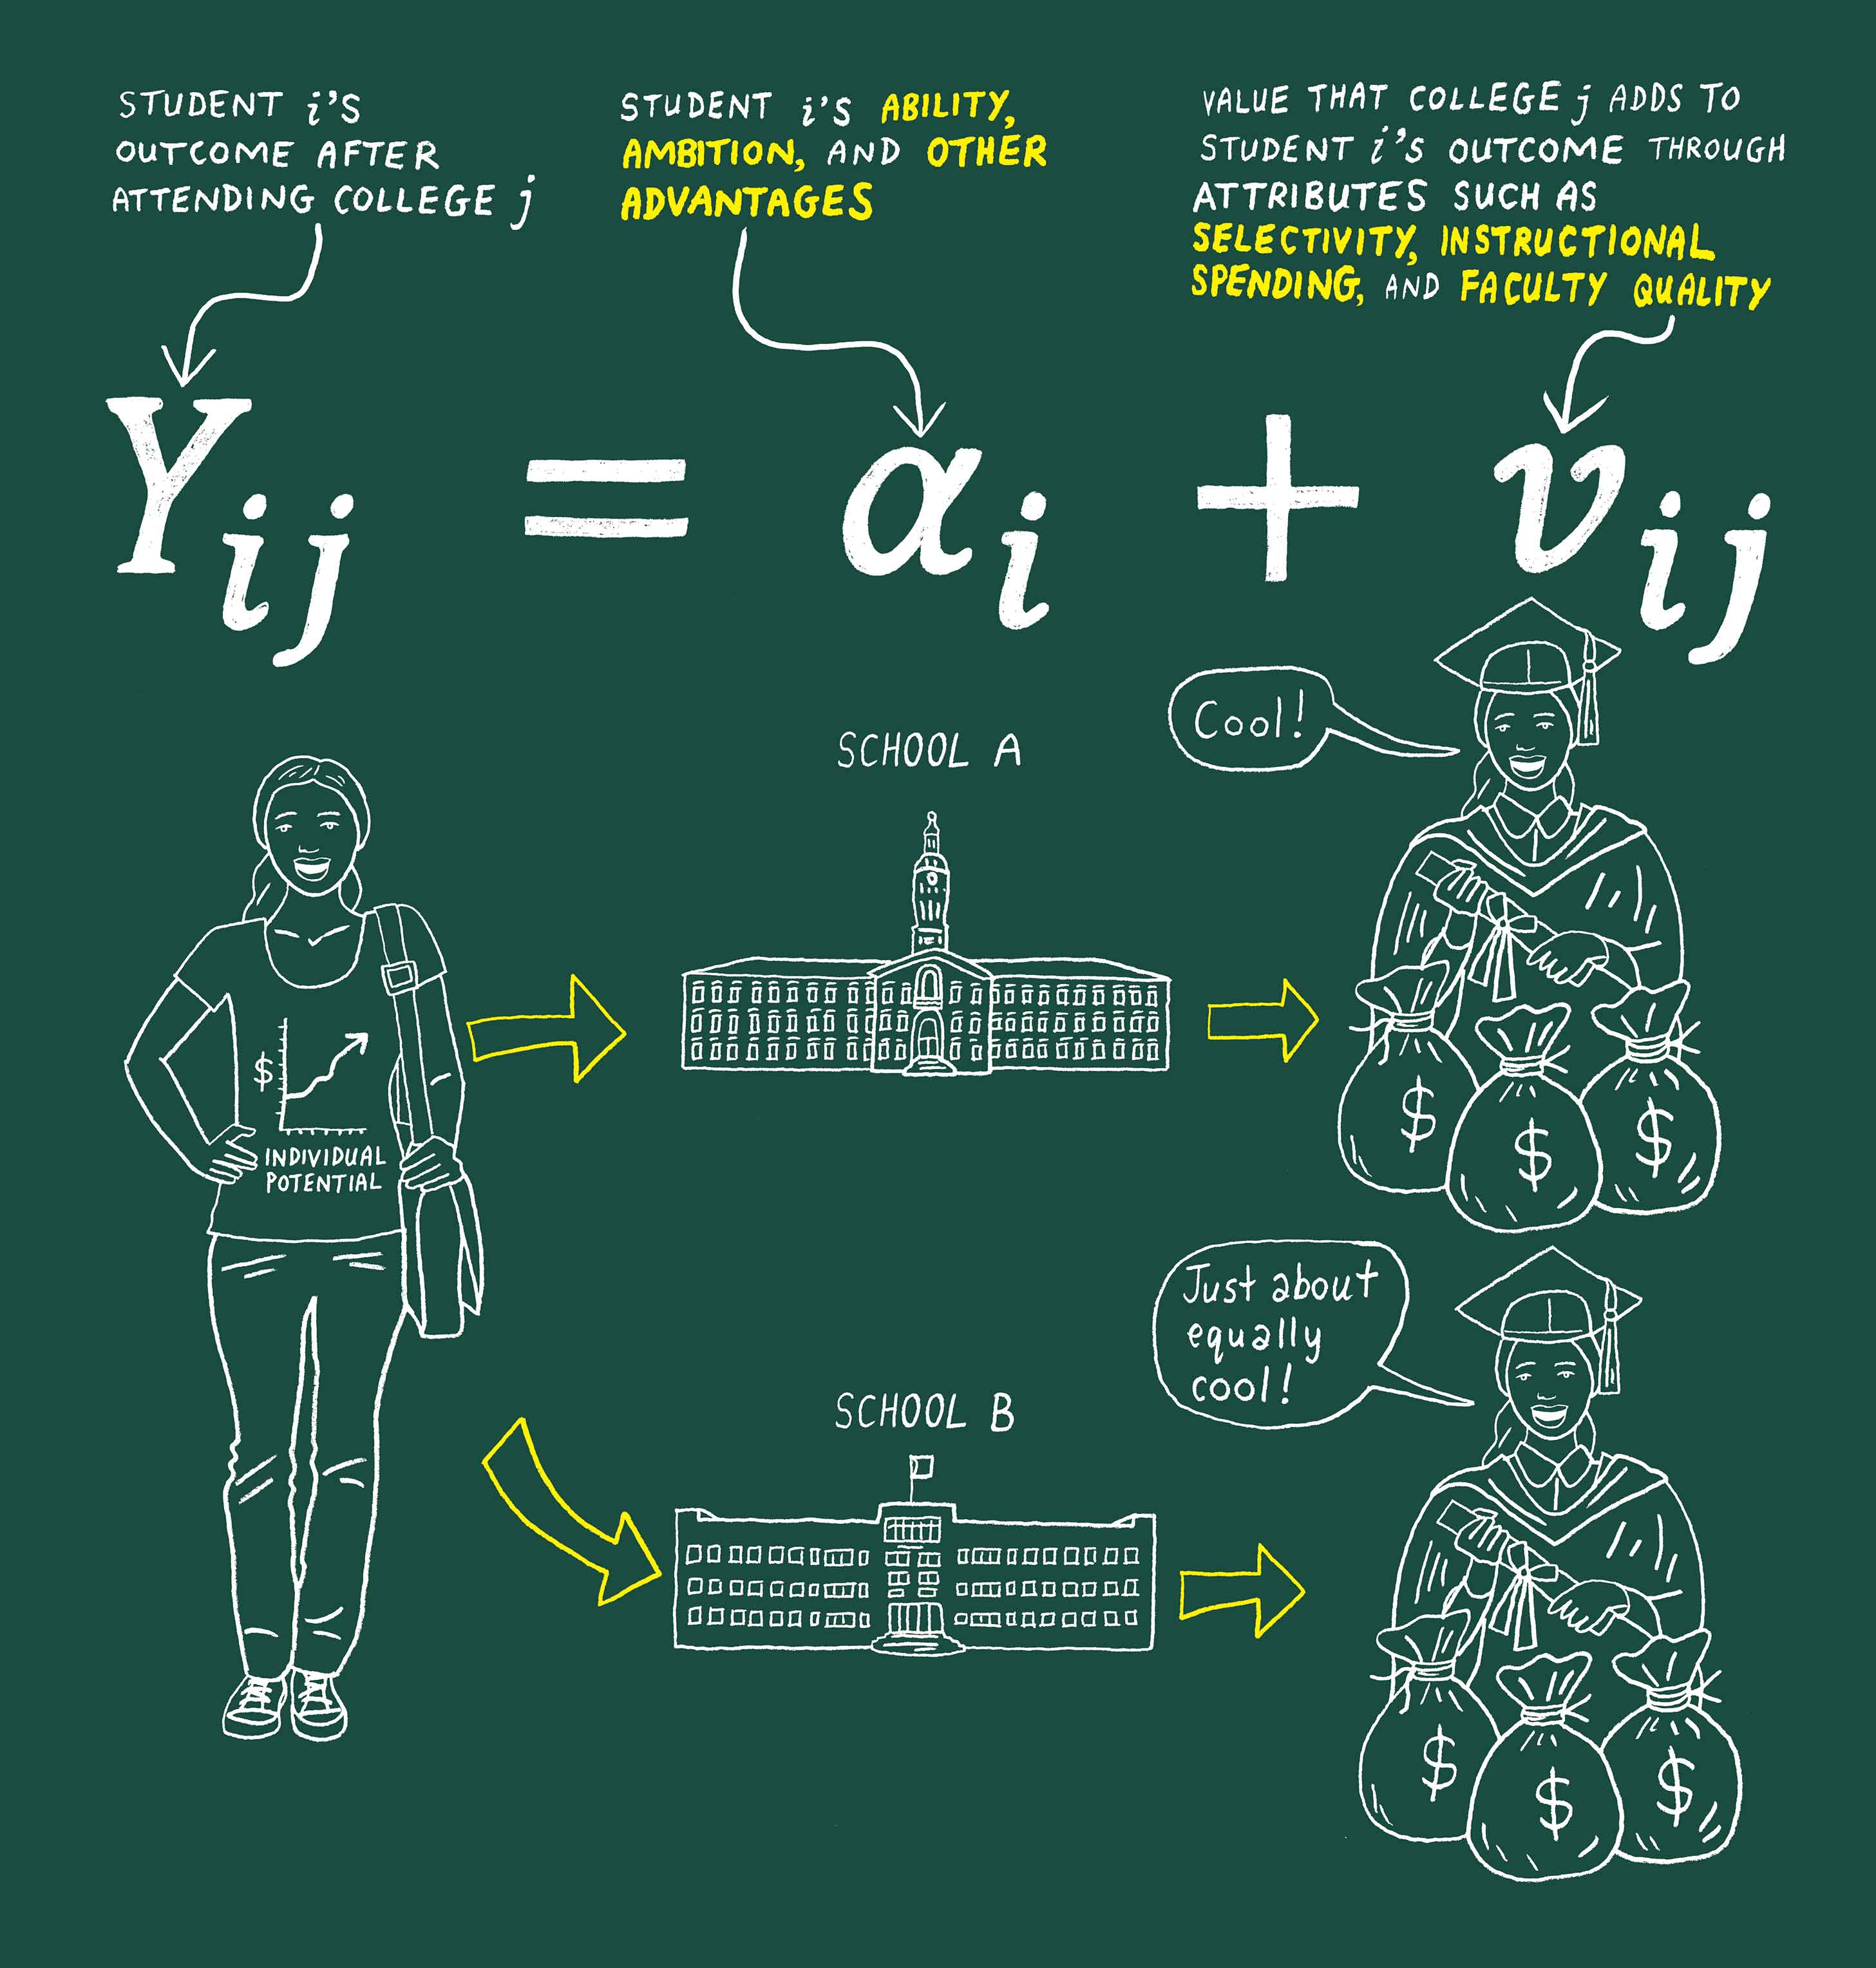 Academic equation showing how a combination of student and college attributes affect post-graduation earnings outcomes, with chalkboard-style illustrations of student and graduates